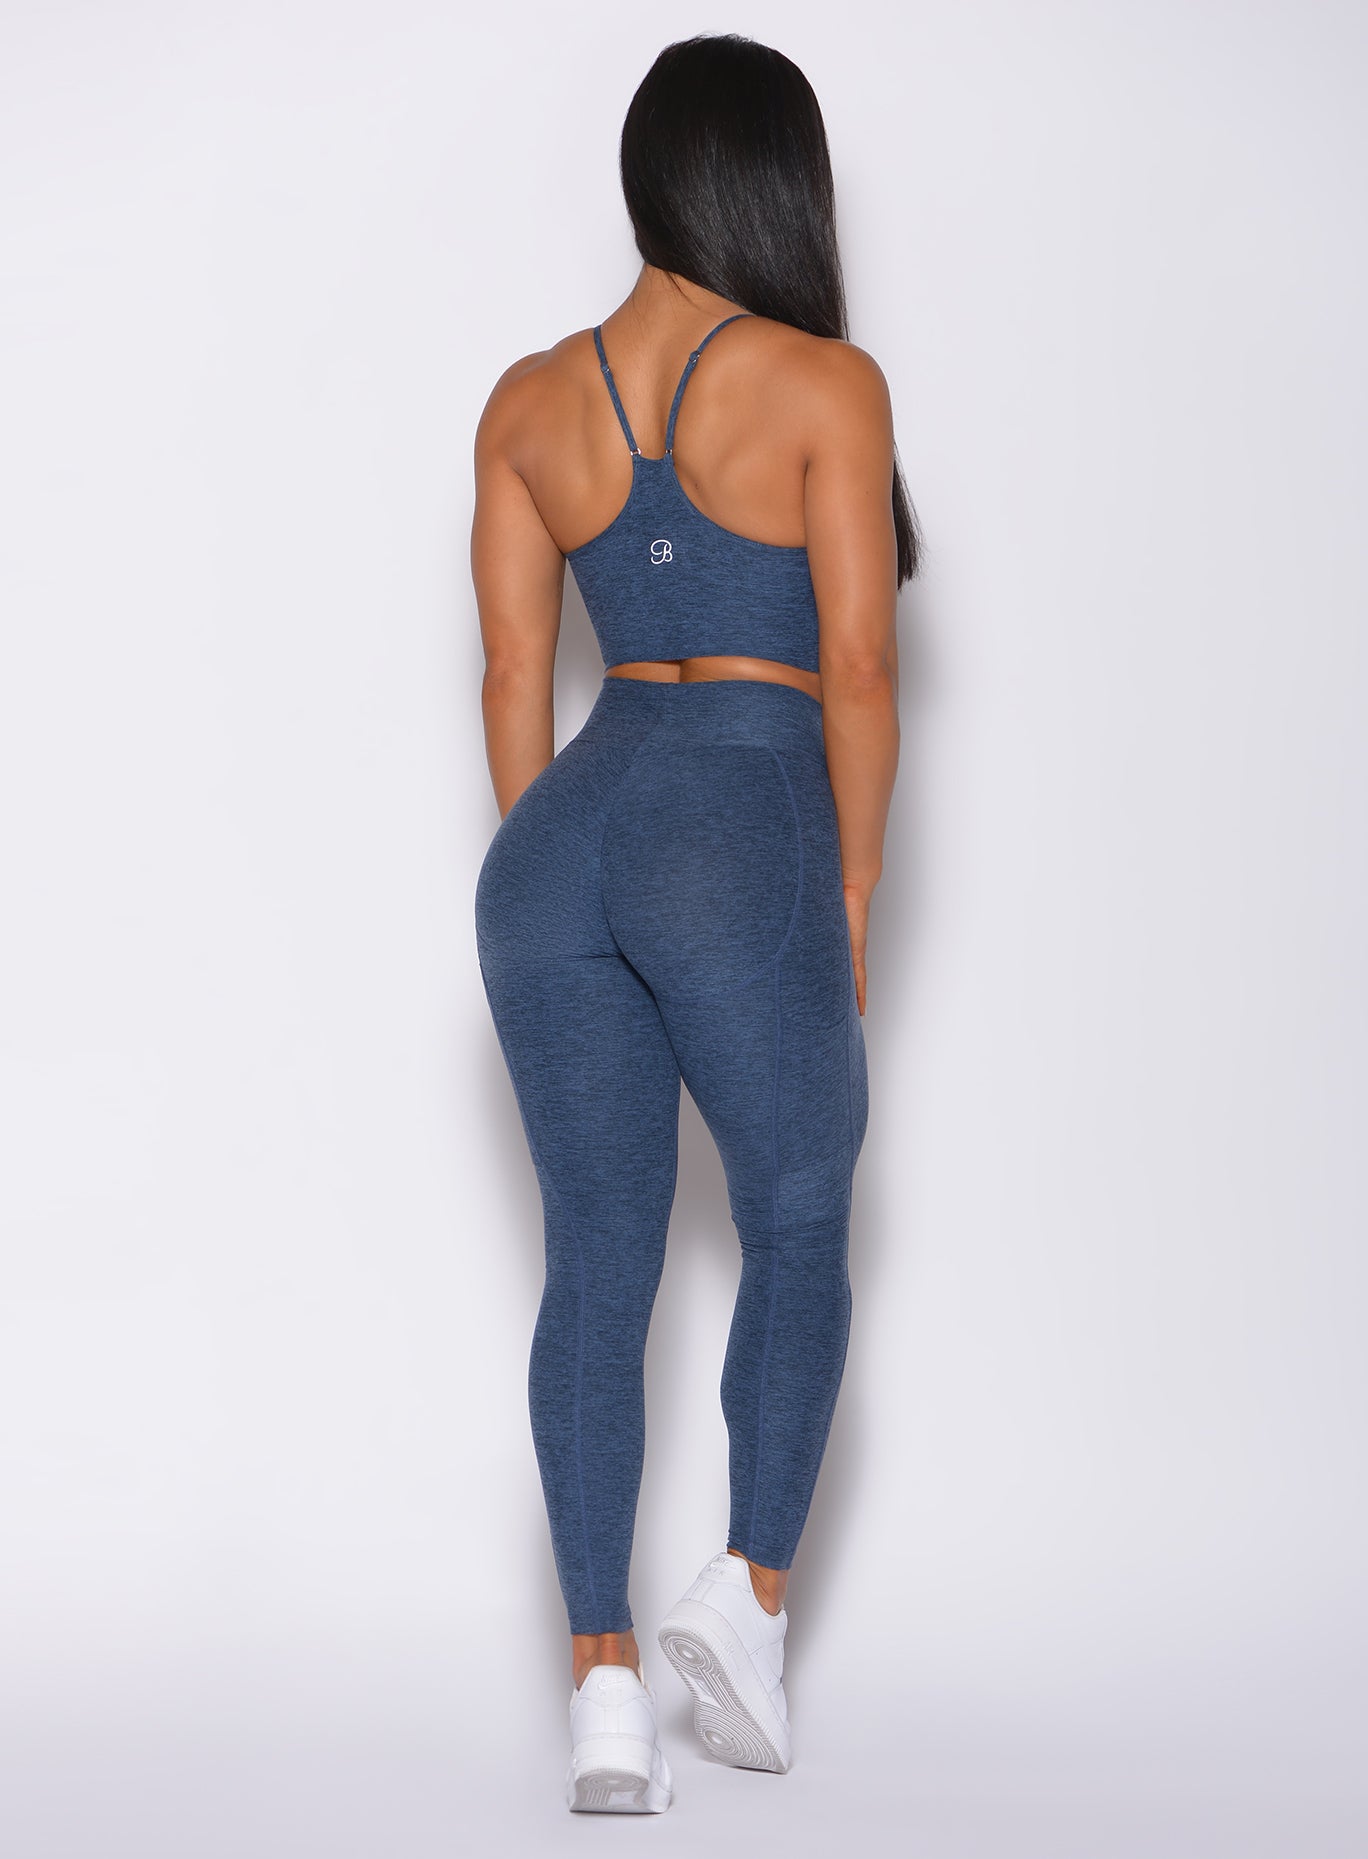 Back profile view of a model in our uplift pocket leggings in night sky color and a matching sports bra 